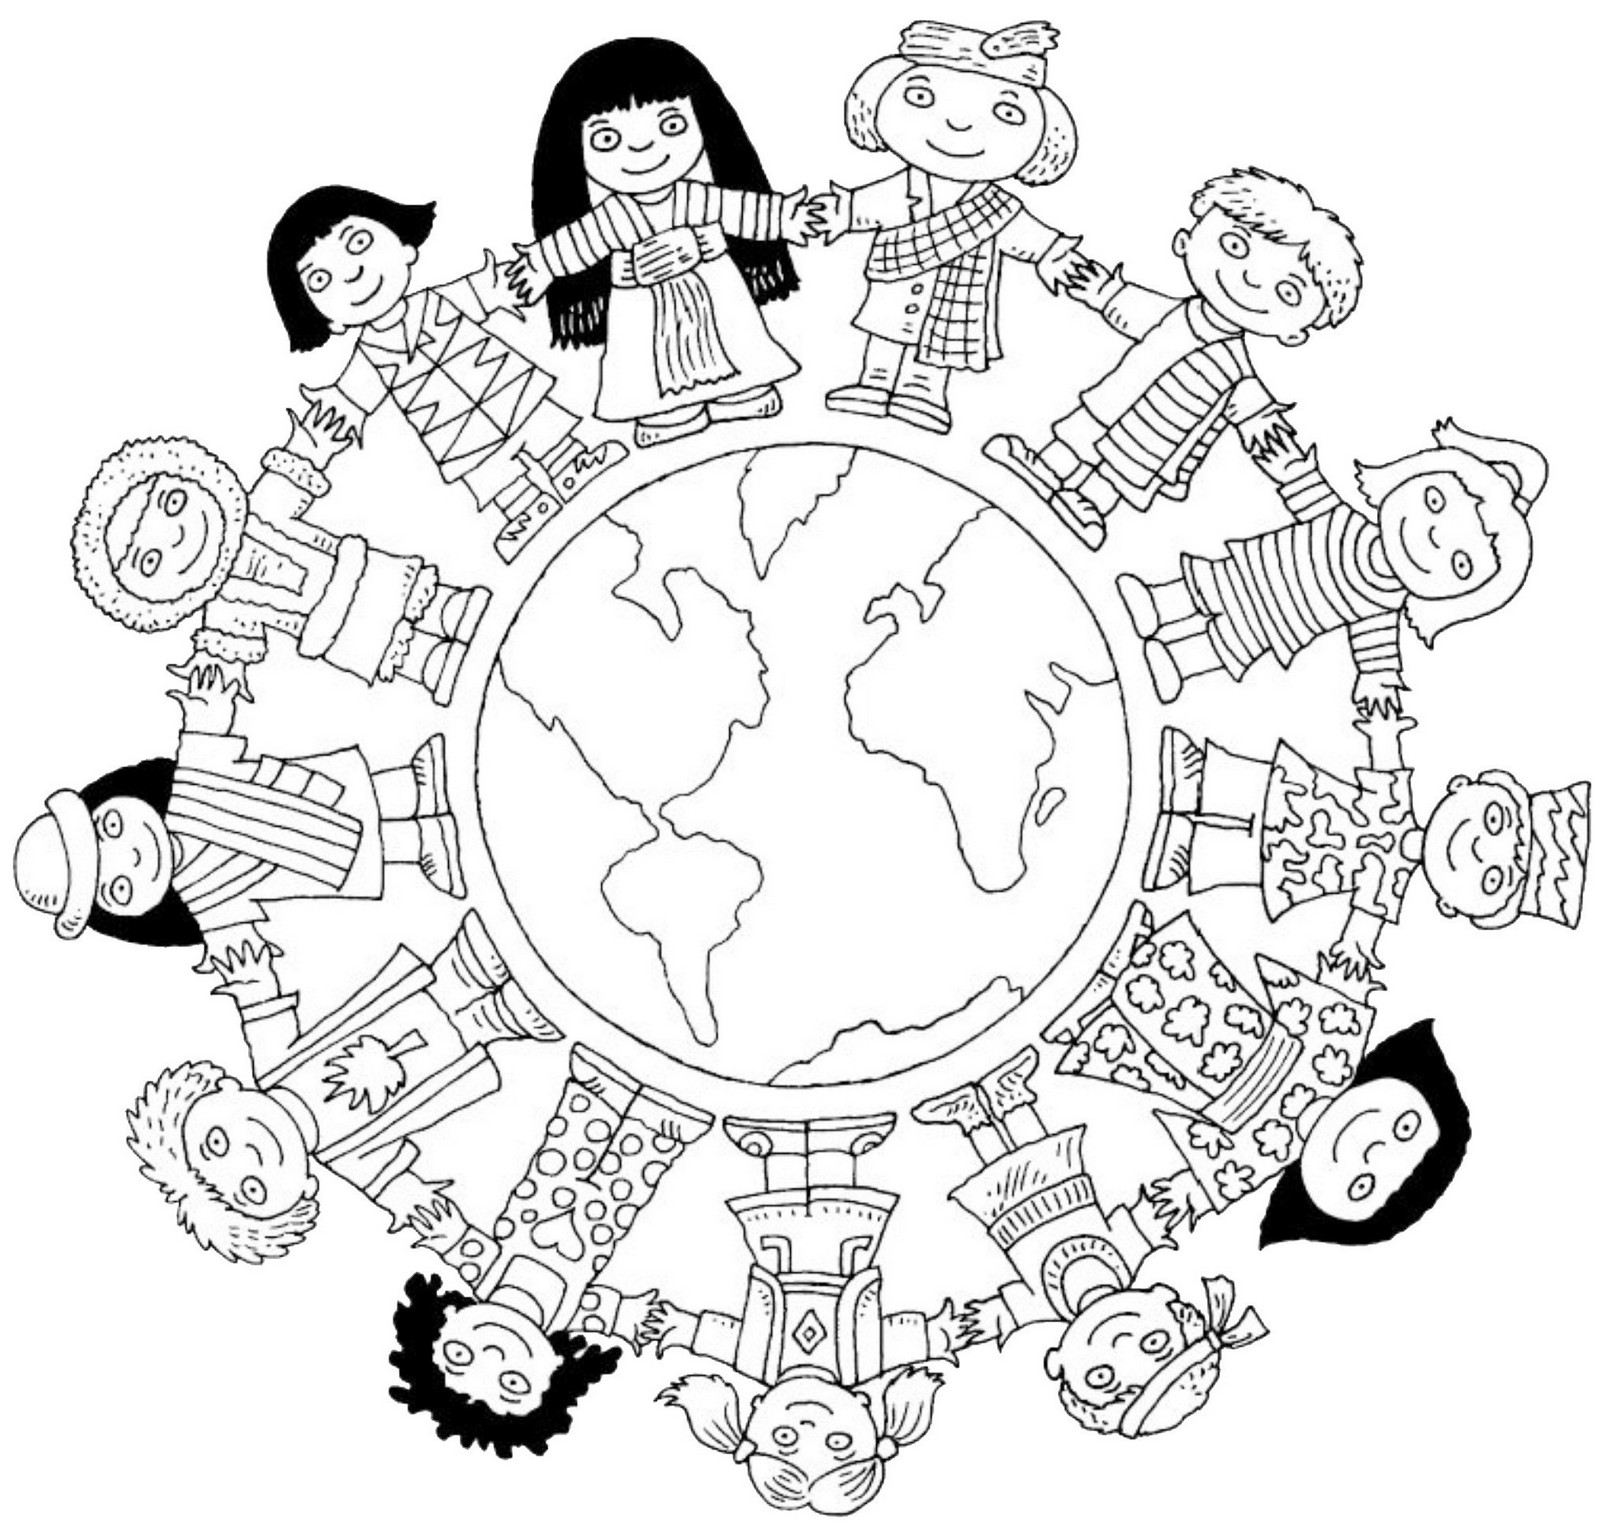 unity in diversity in world coloring sheet for kids